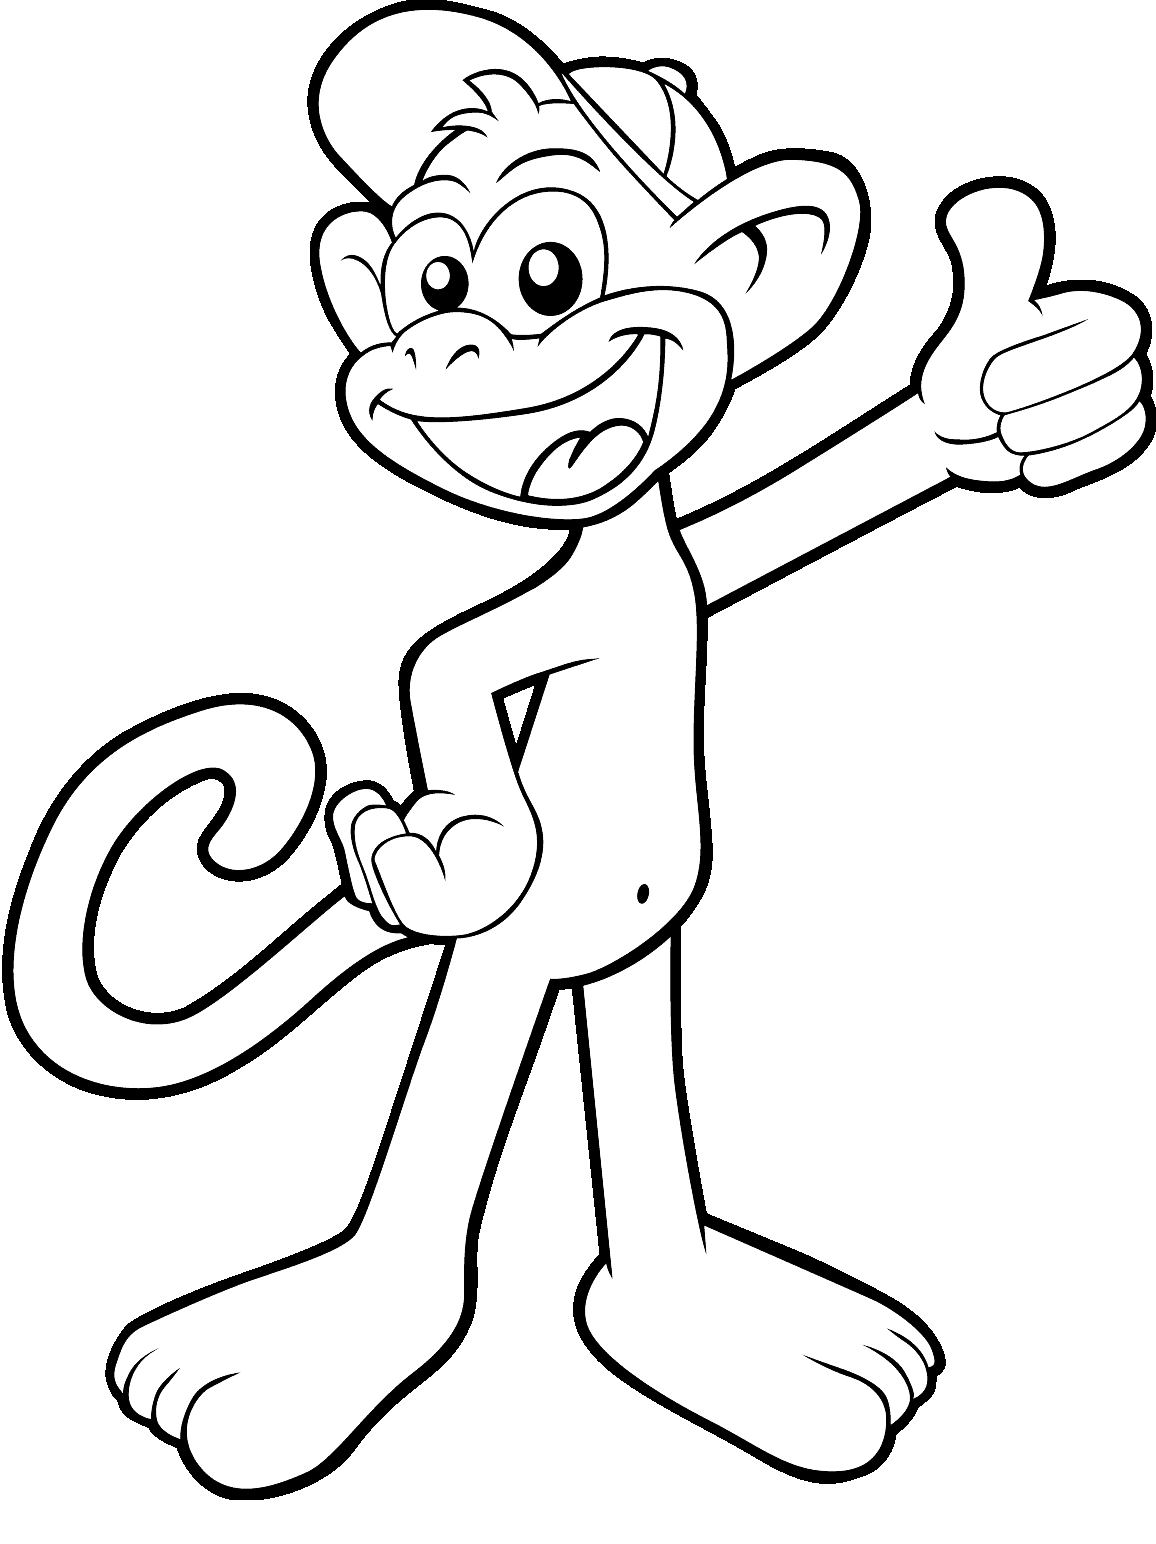 Cute Cartoon Monkey Coloring Page